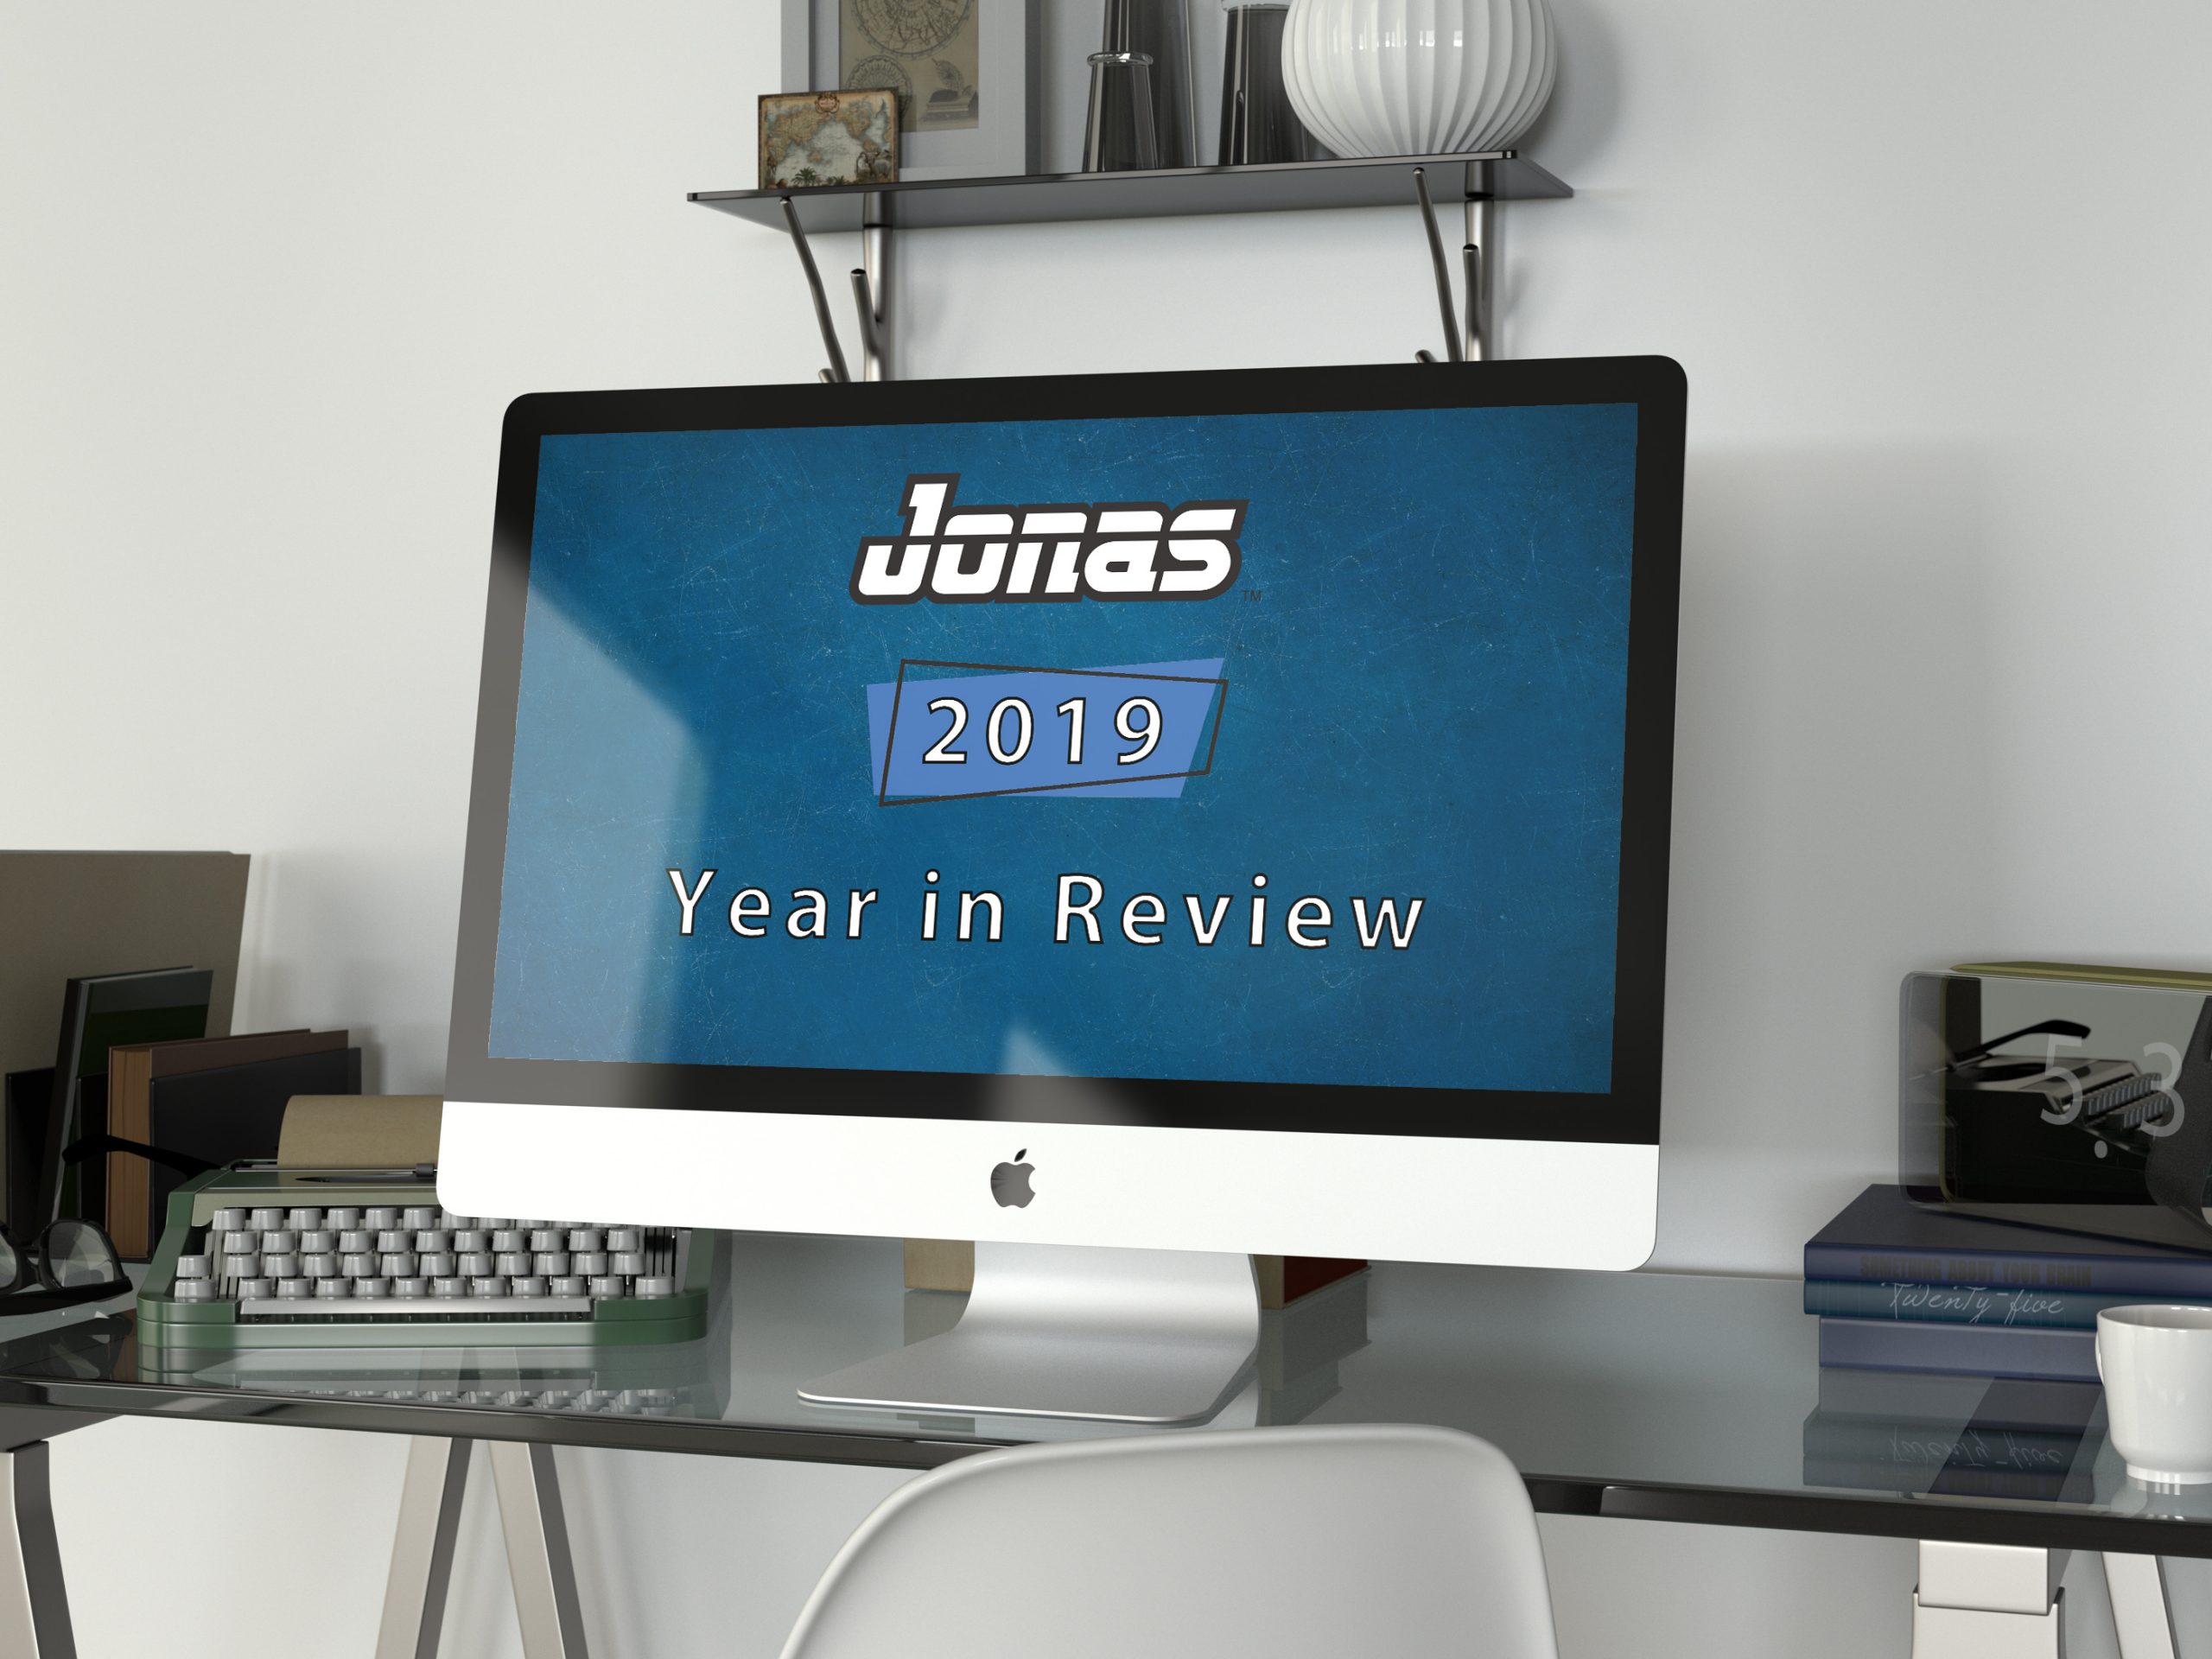 Jonas Software 2019 Year in Review